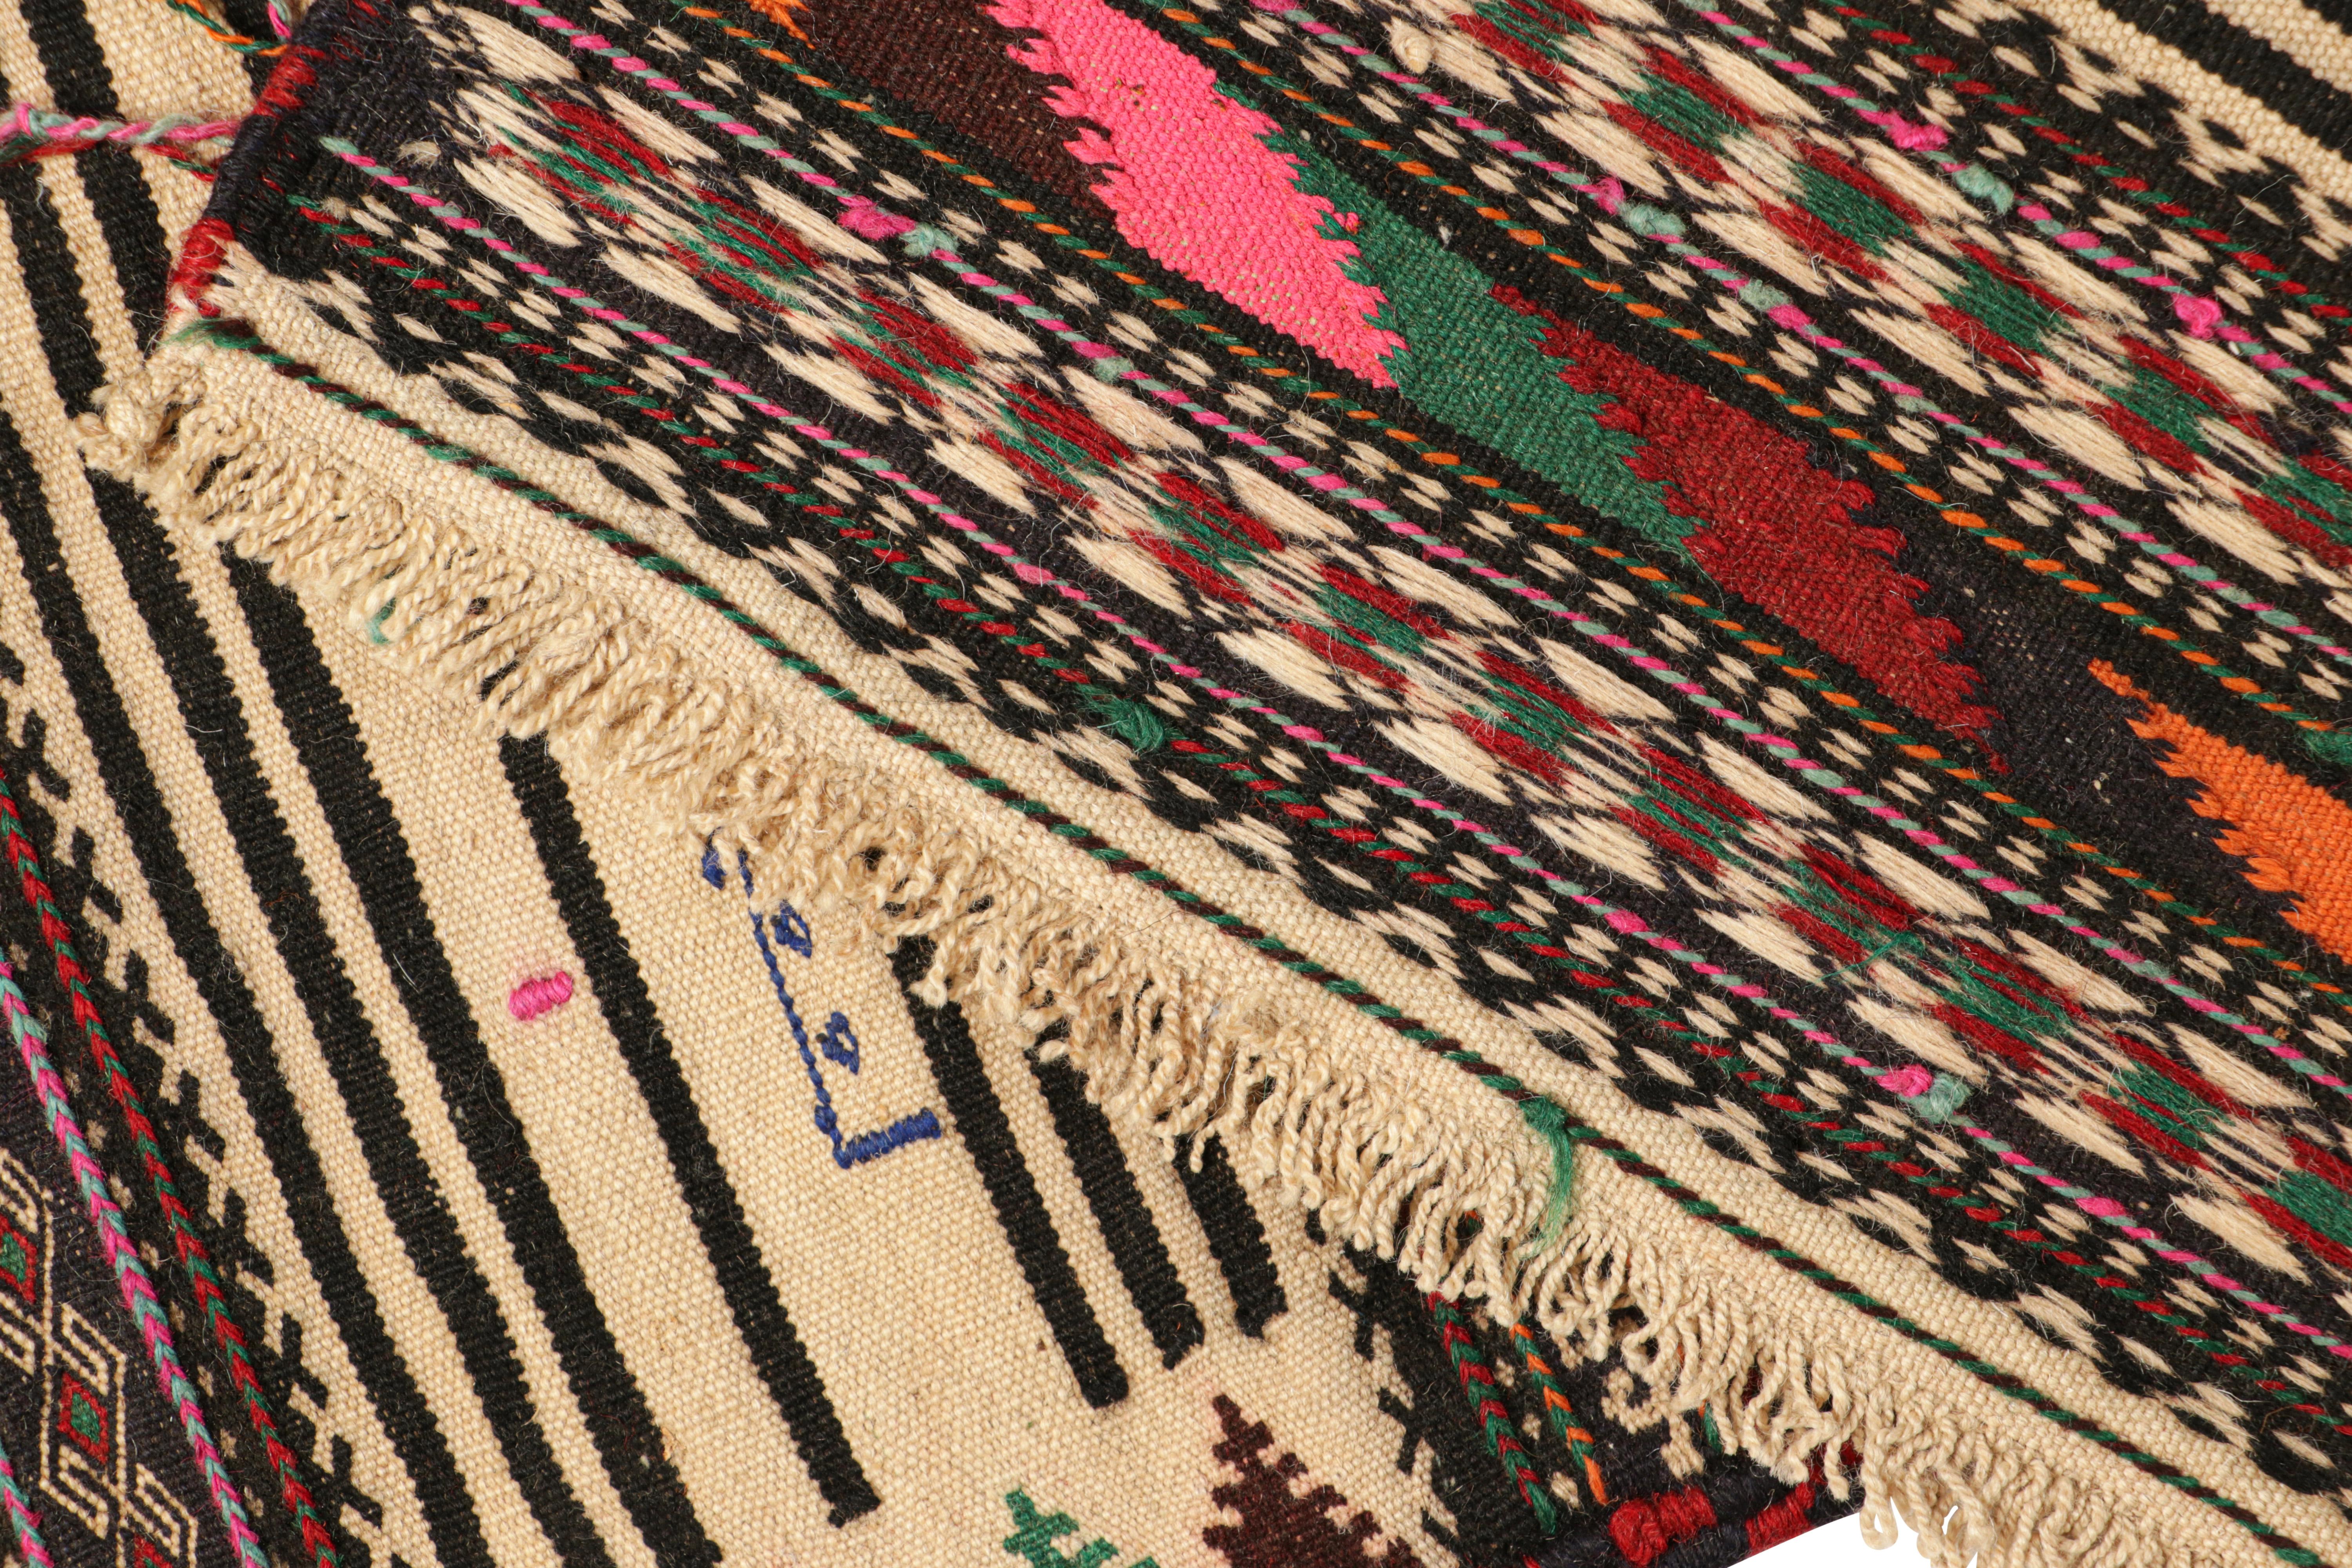 Wool Vintage Afghan Kilim with Polychromatic Geometric Patterns, from Rug & Kilim For Sale